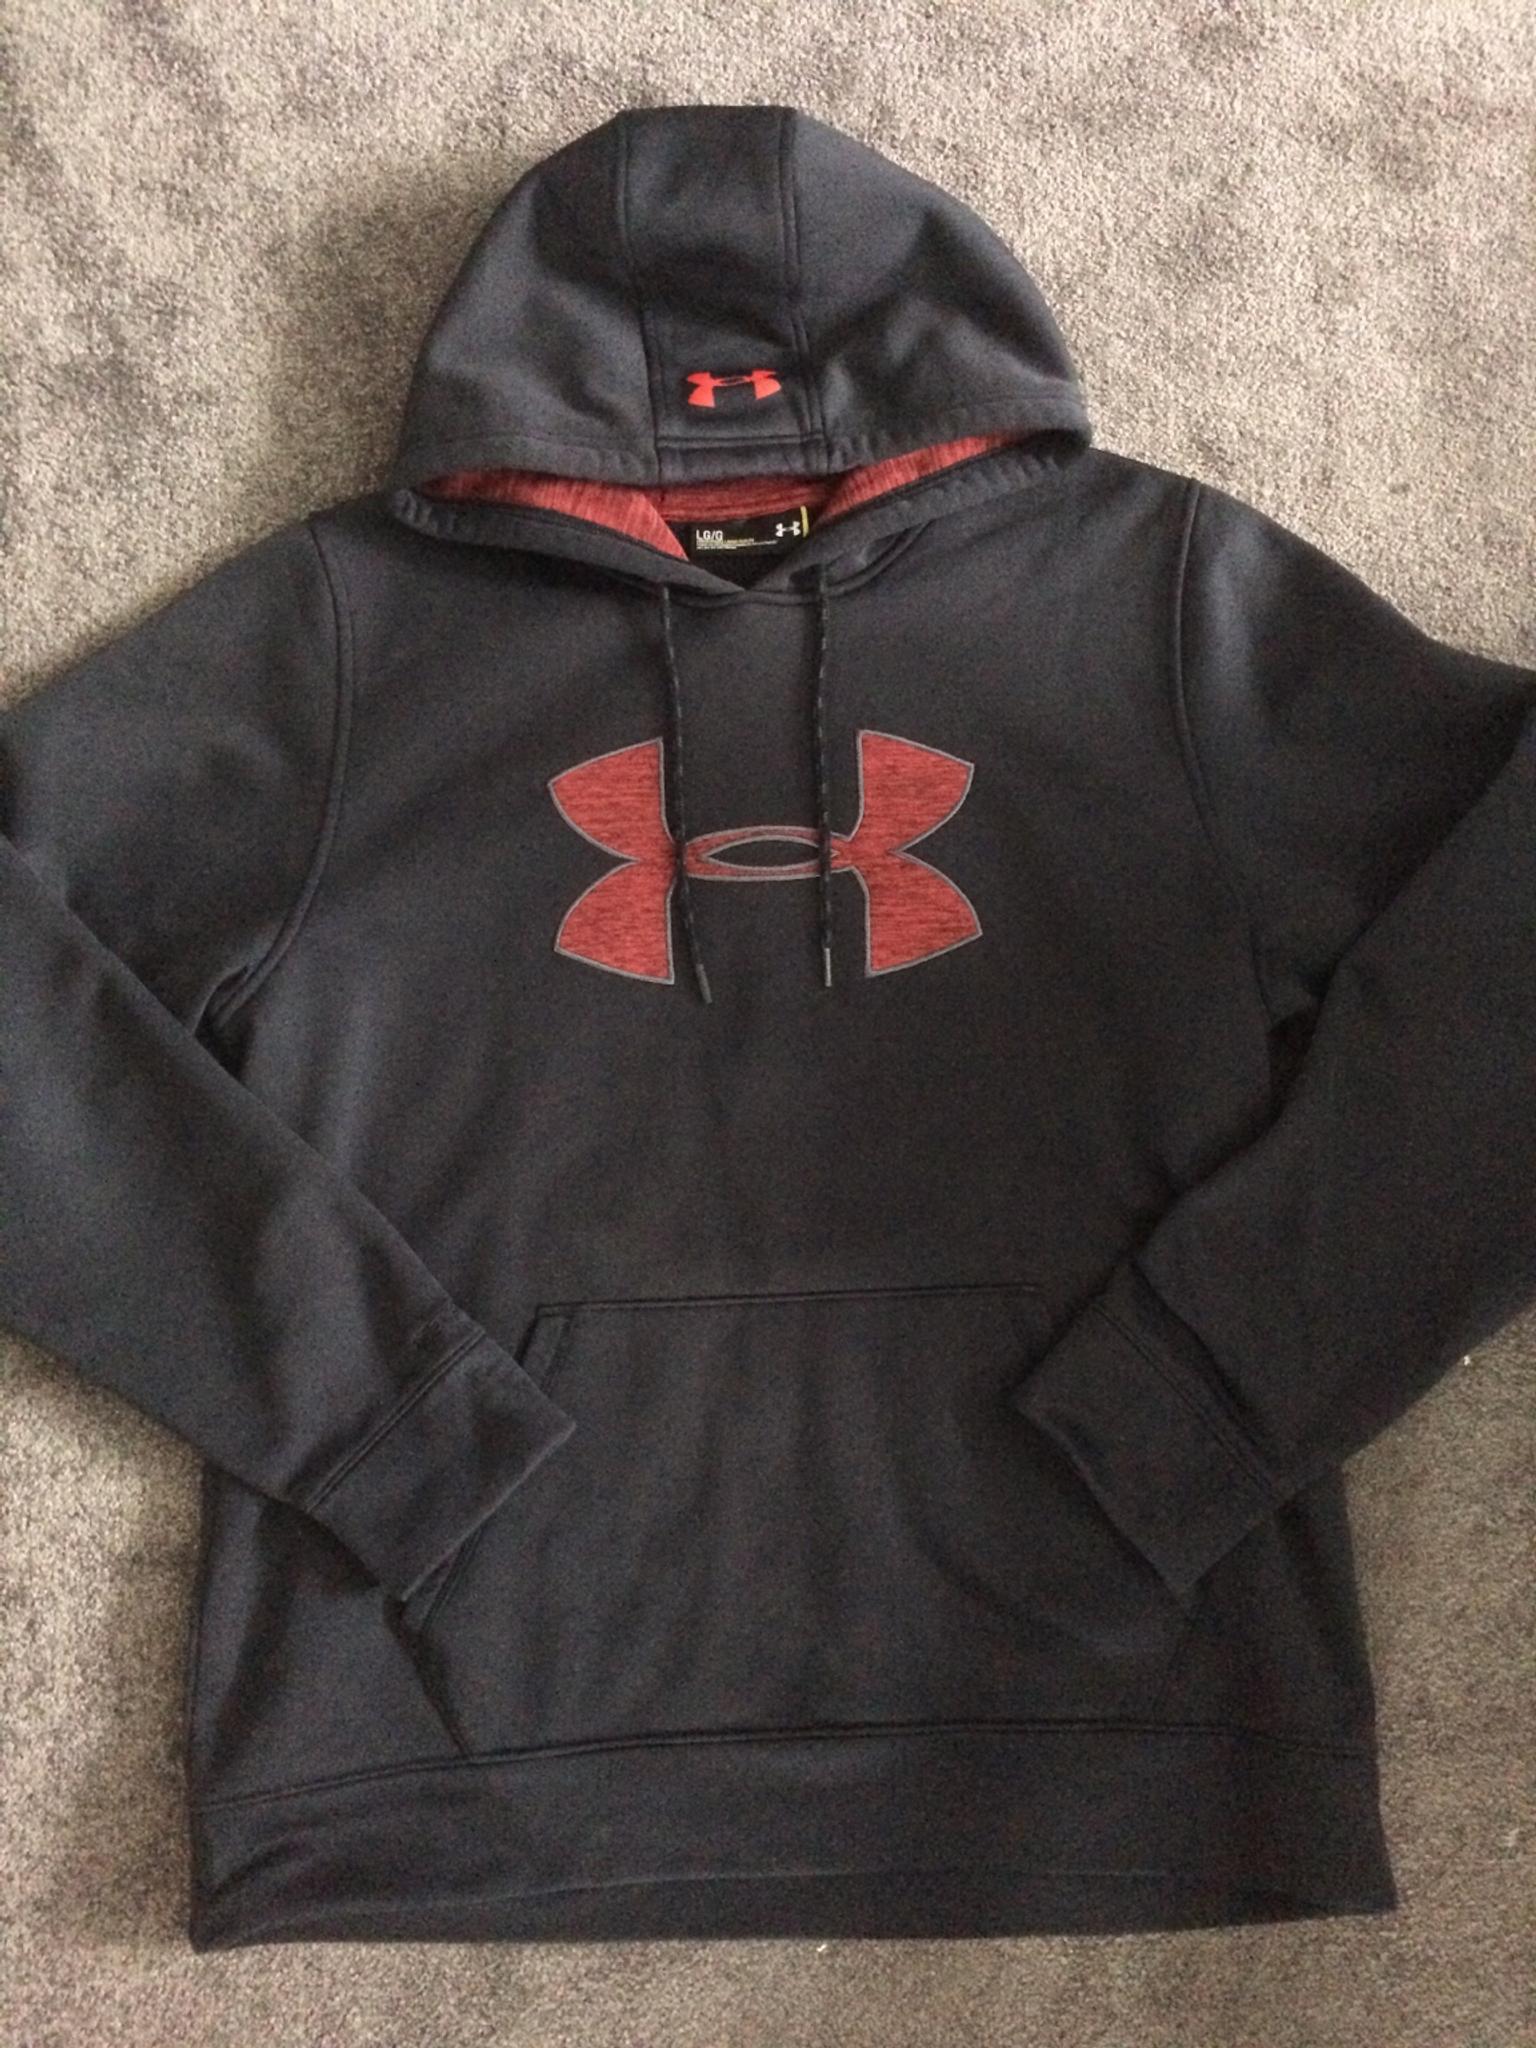 Men's Large Under Armour Hoodie in CW8 